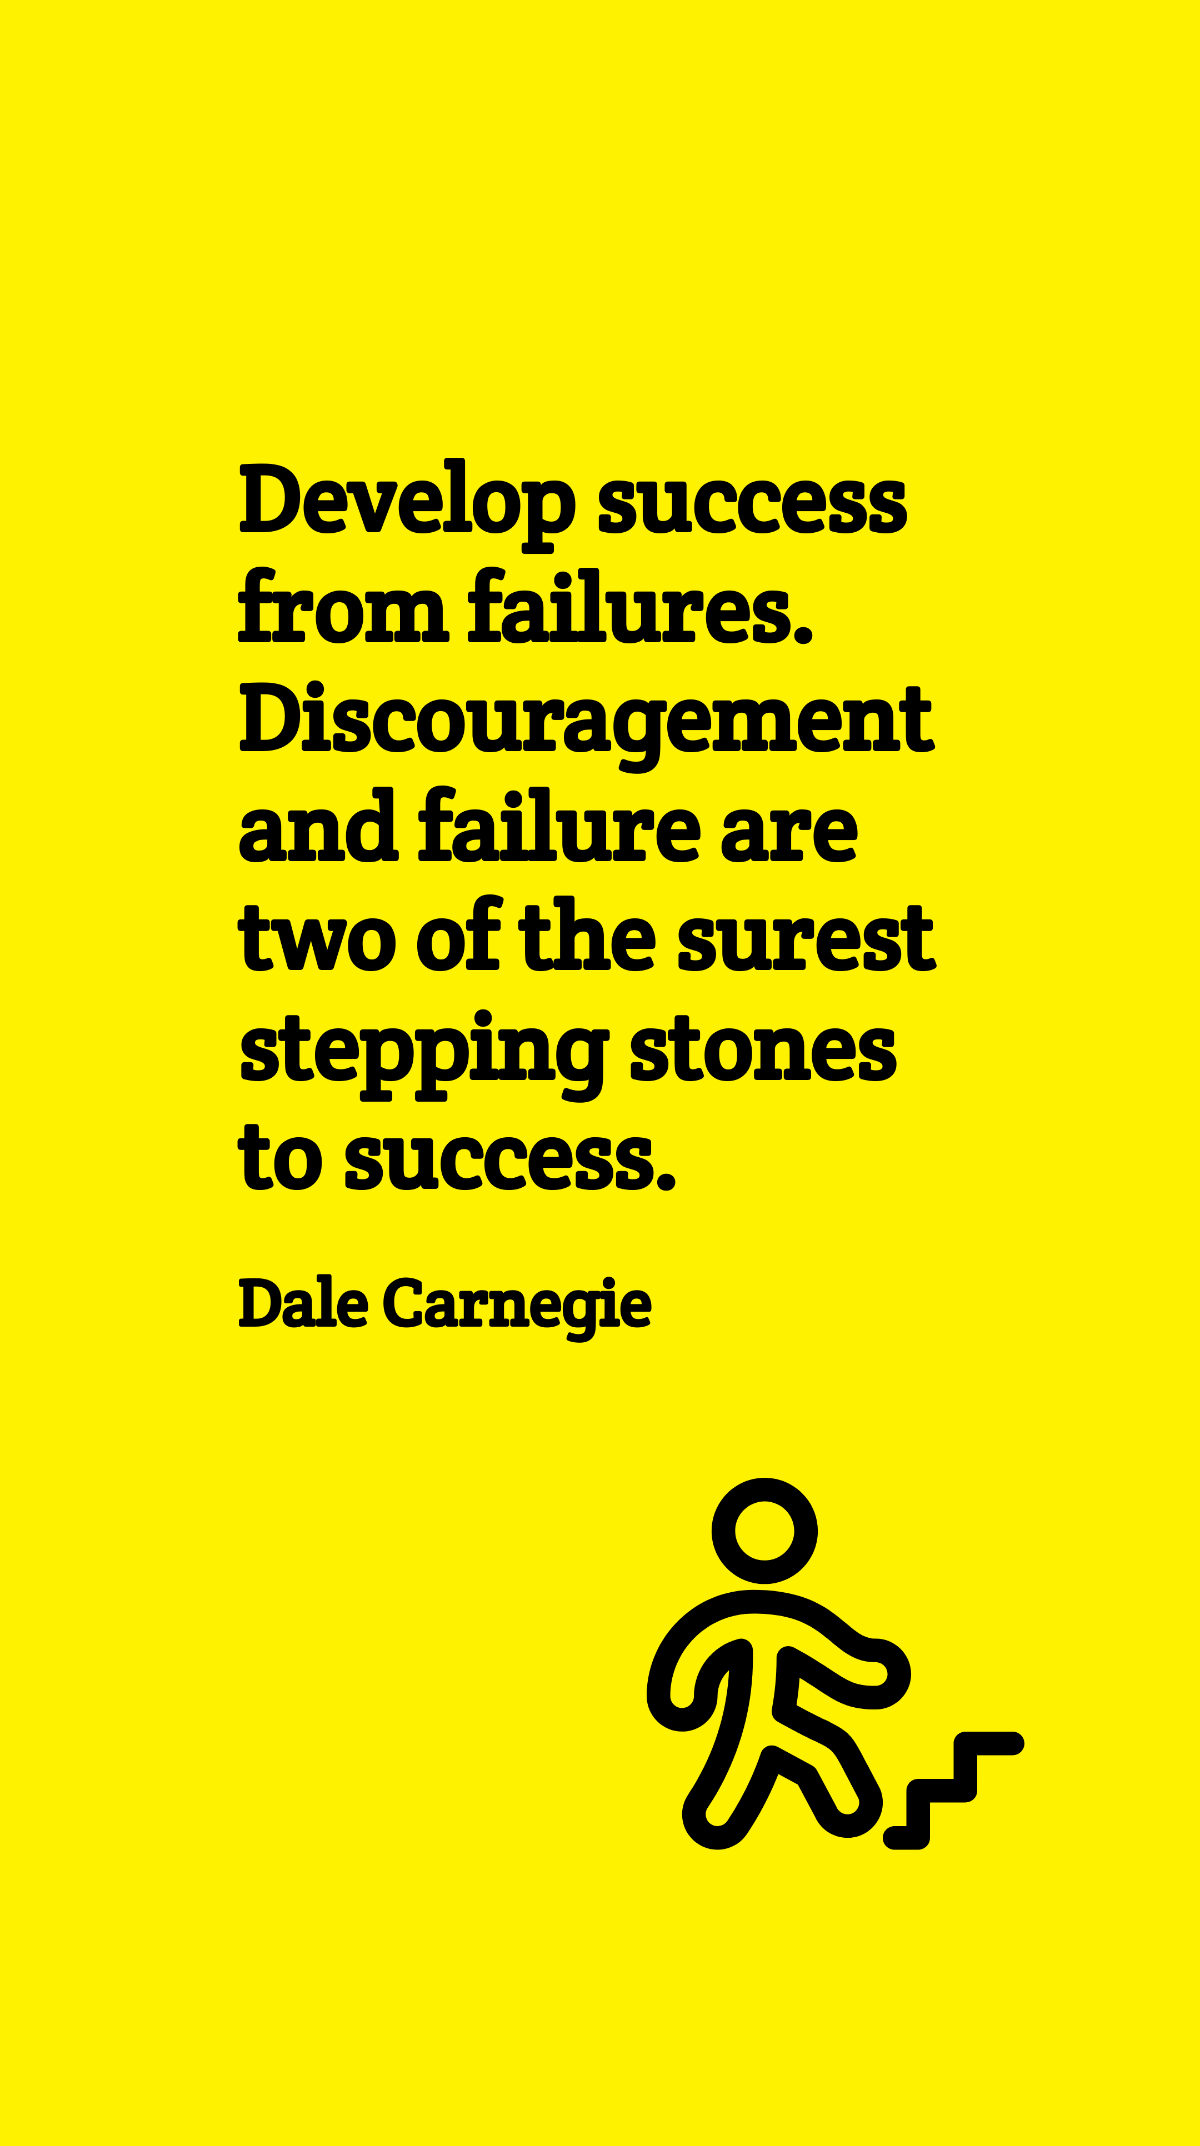 Dale Carnegie - Develop success from failures. Discouragement and failure are two of the surest stepping stones to success. Template